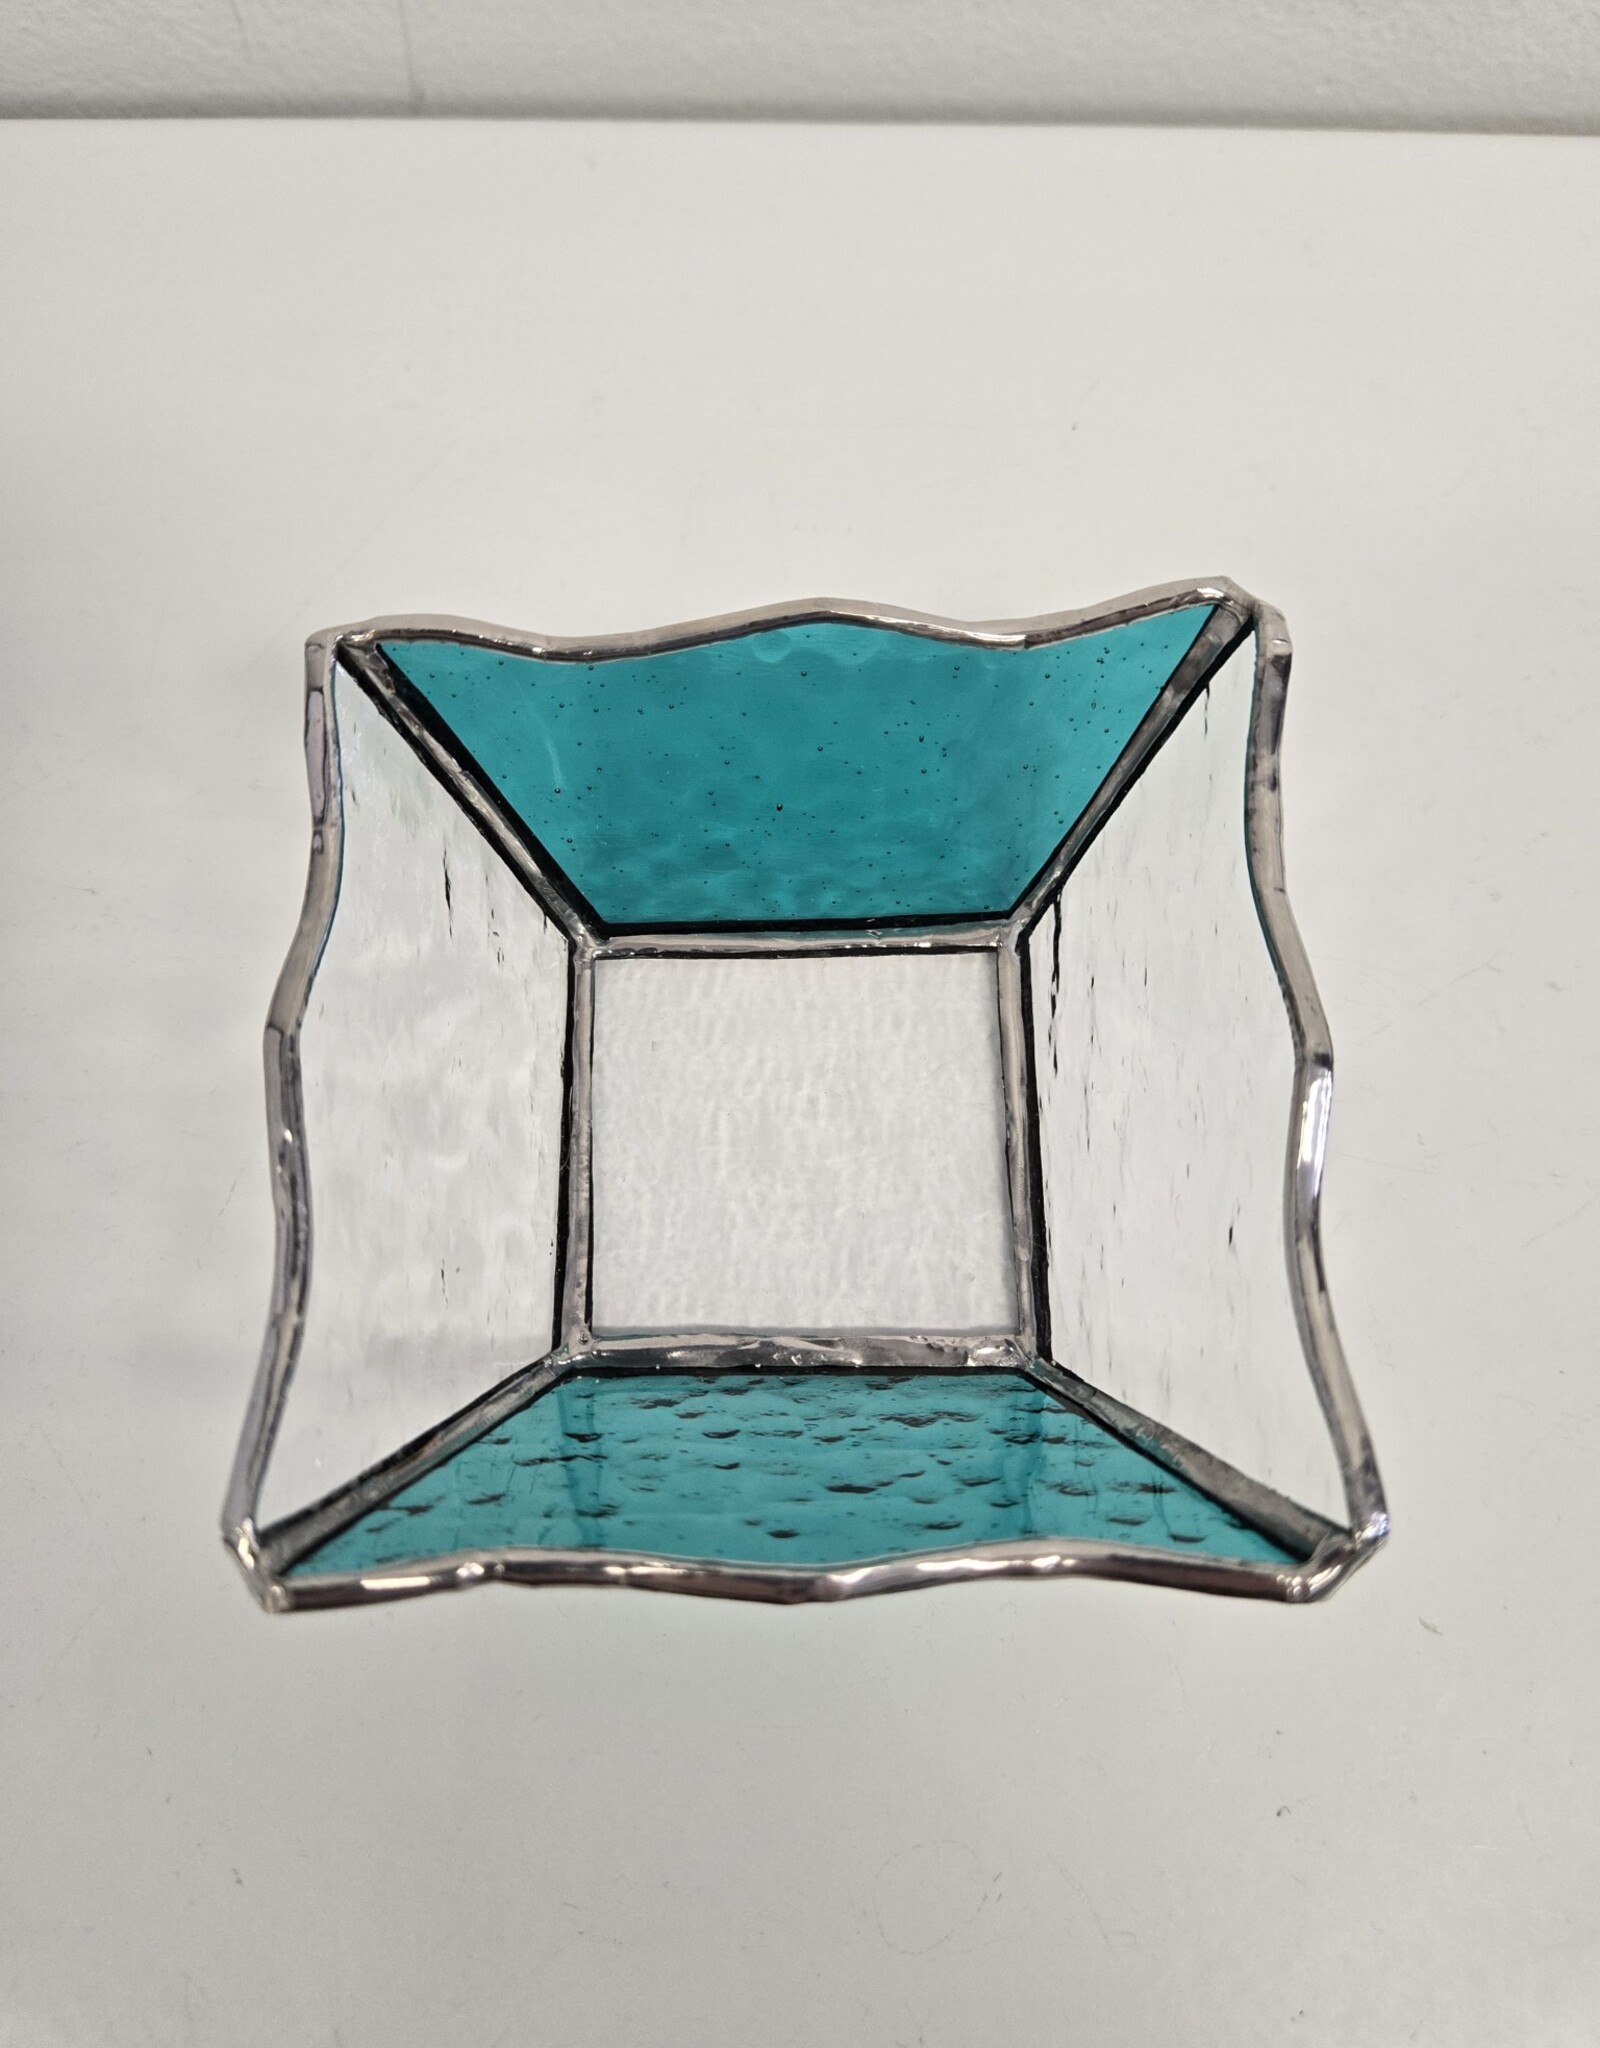 Stained Glass Dish 3.5"x3.5"x1.5" - teal